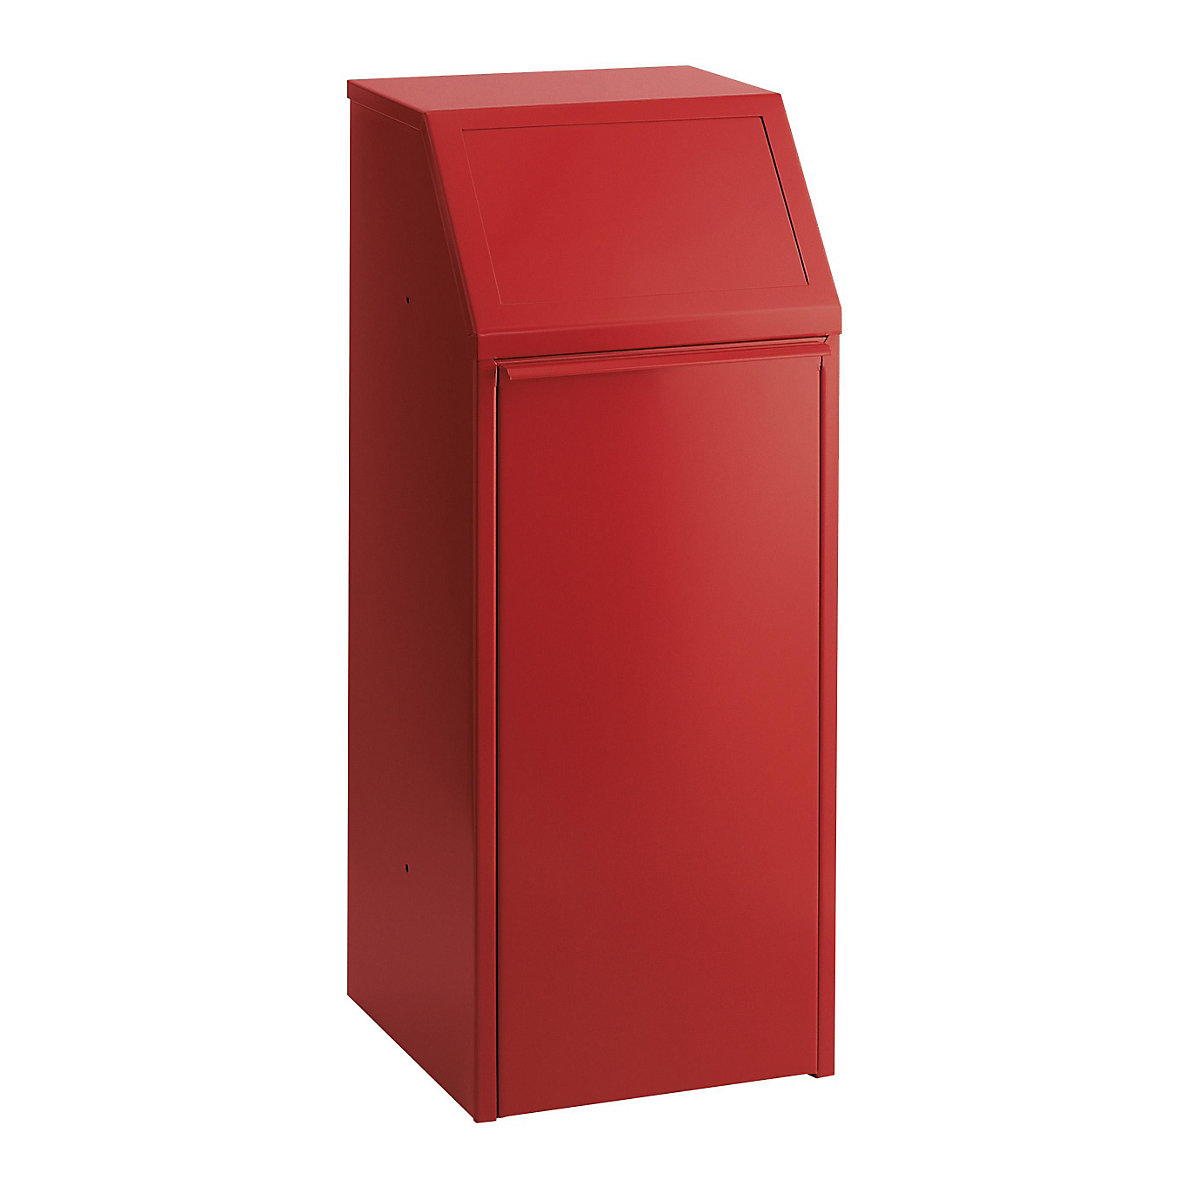 Sheet steel recyclable waste collector, capacity 70 l, WxHxD 408 x 1007 x 405 mm, red-3